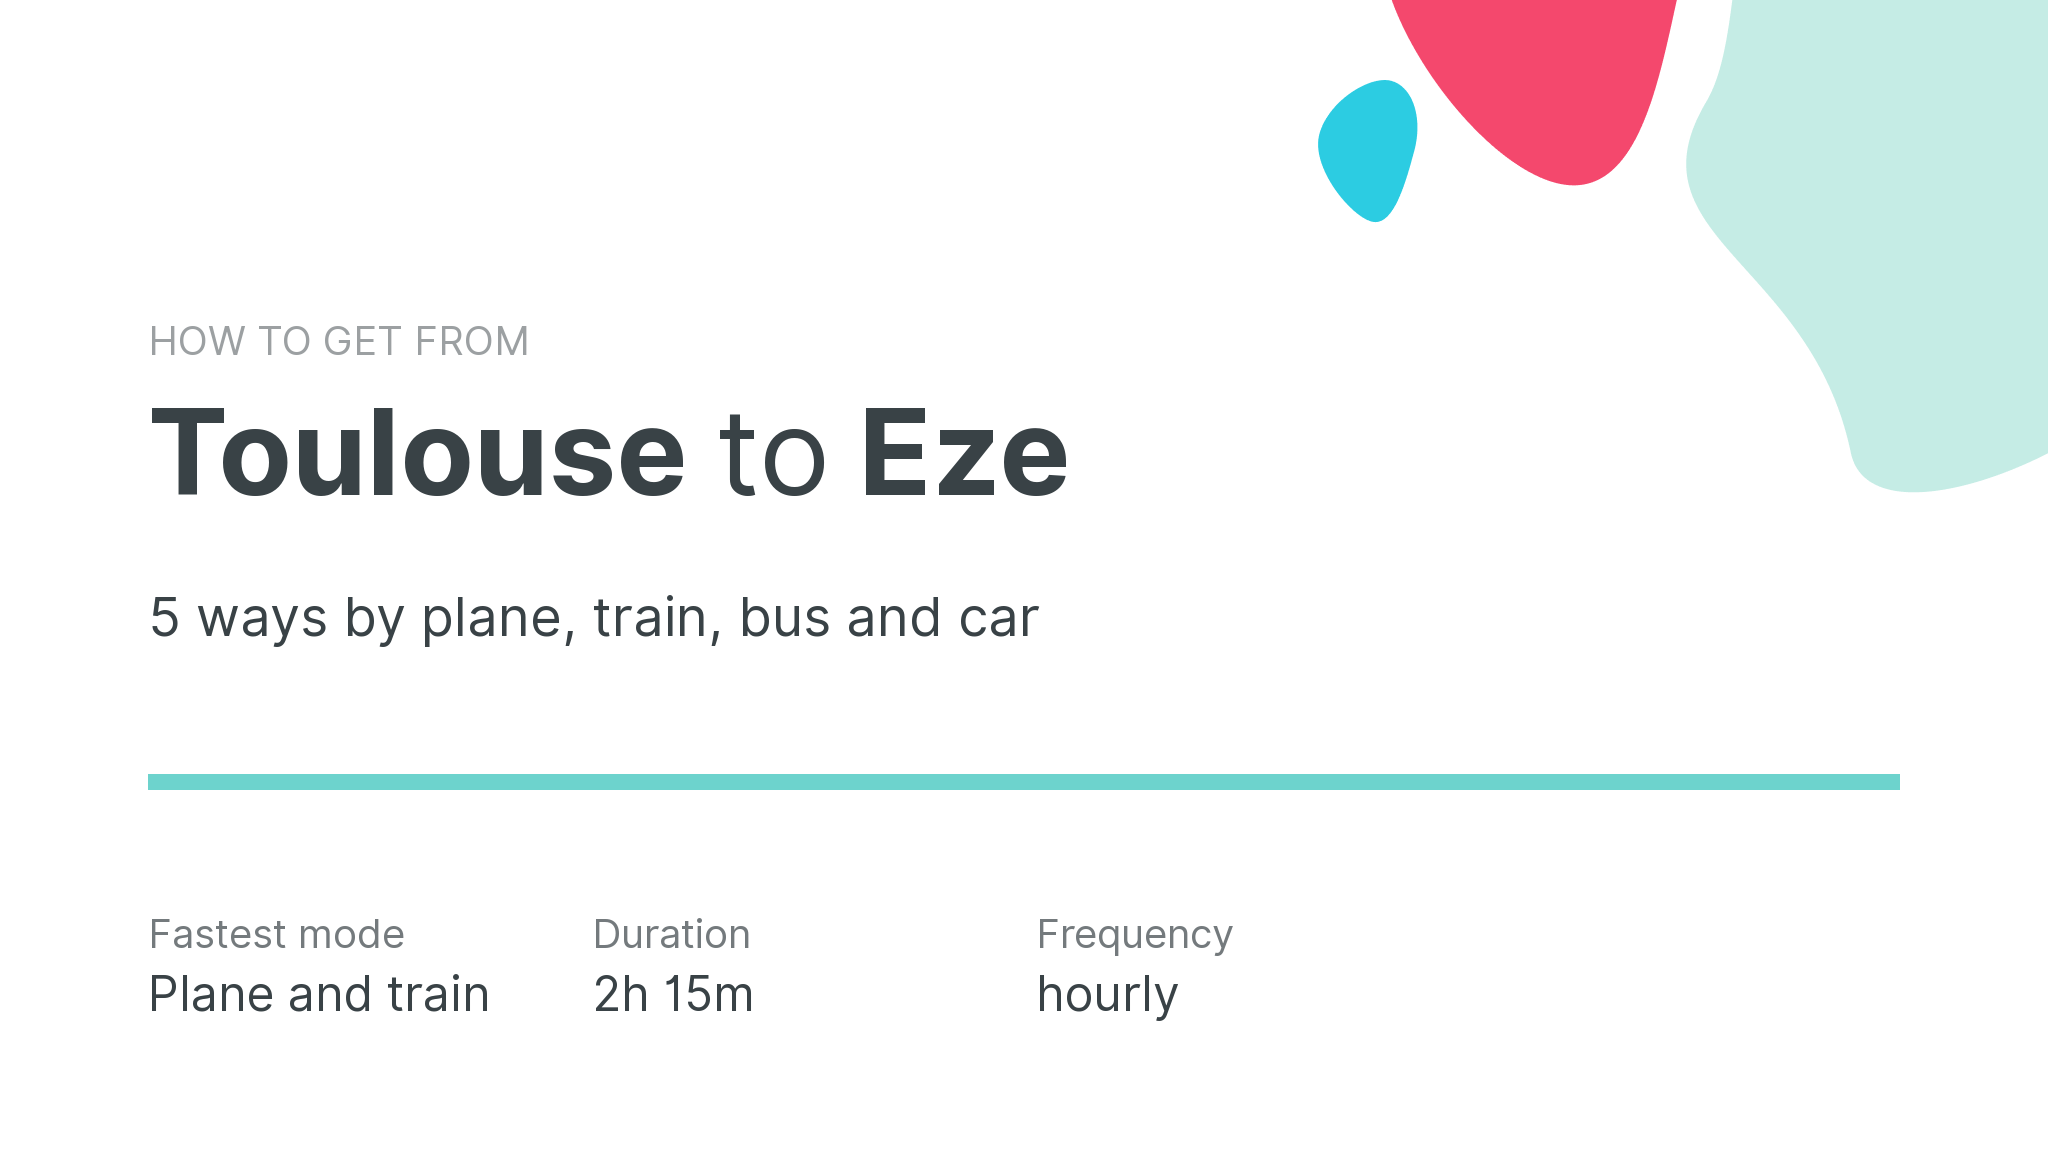 How do I get from Toulouse to Eze